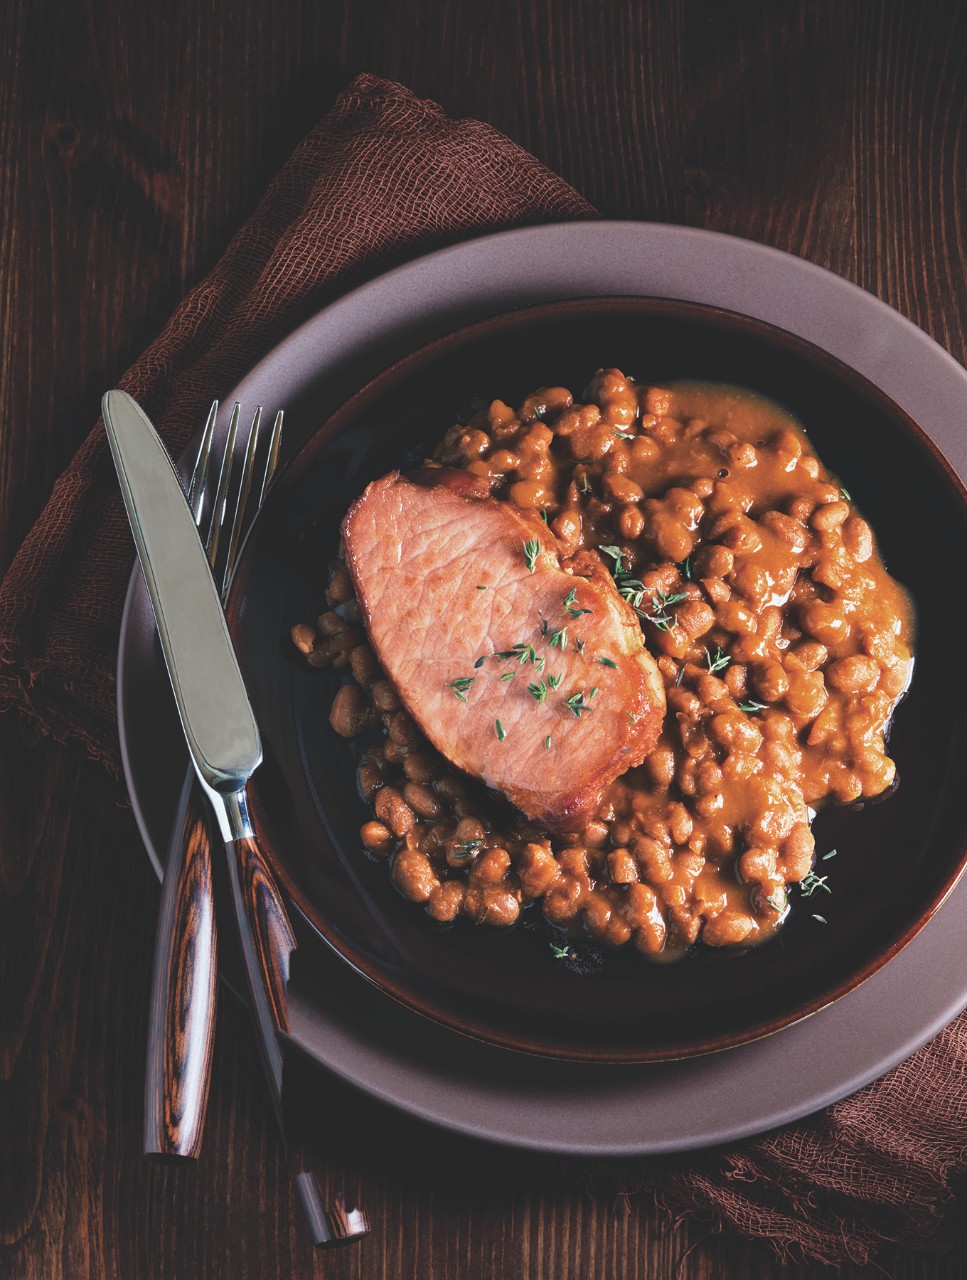 Molasses Baked Beans With Smoked Pork Chops